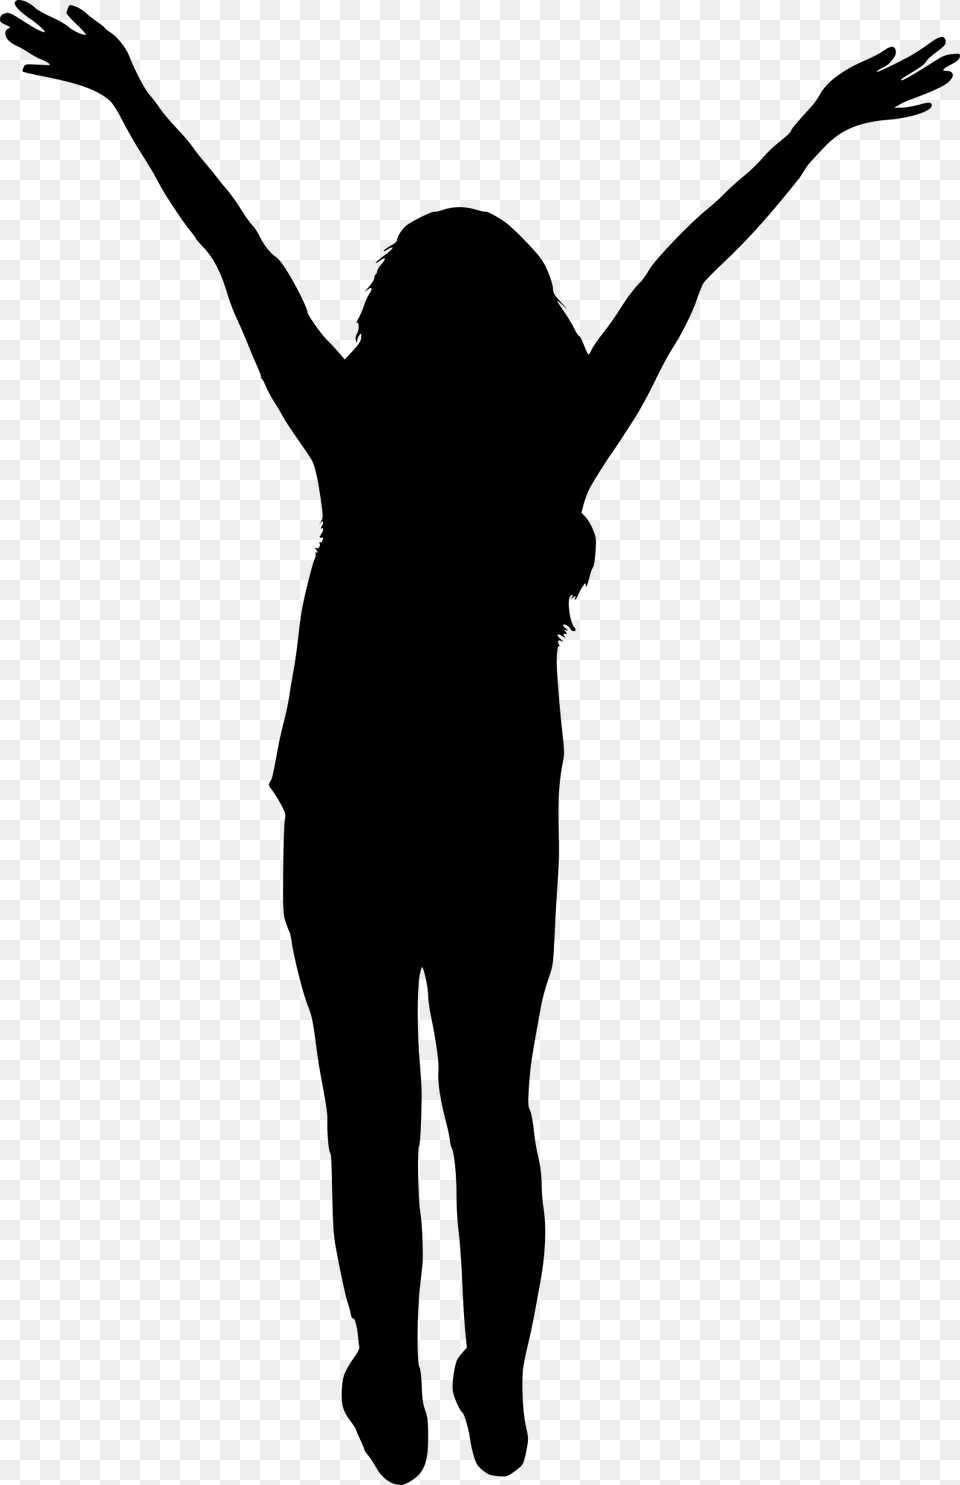 People With Hands Up Silhouette Woman Silhouette Hands Up, Gray Png